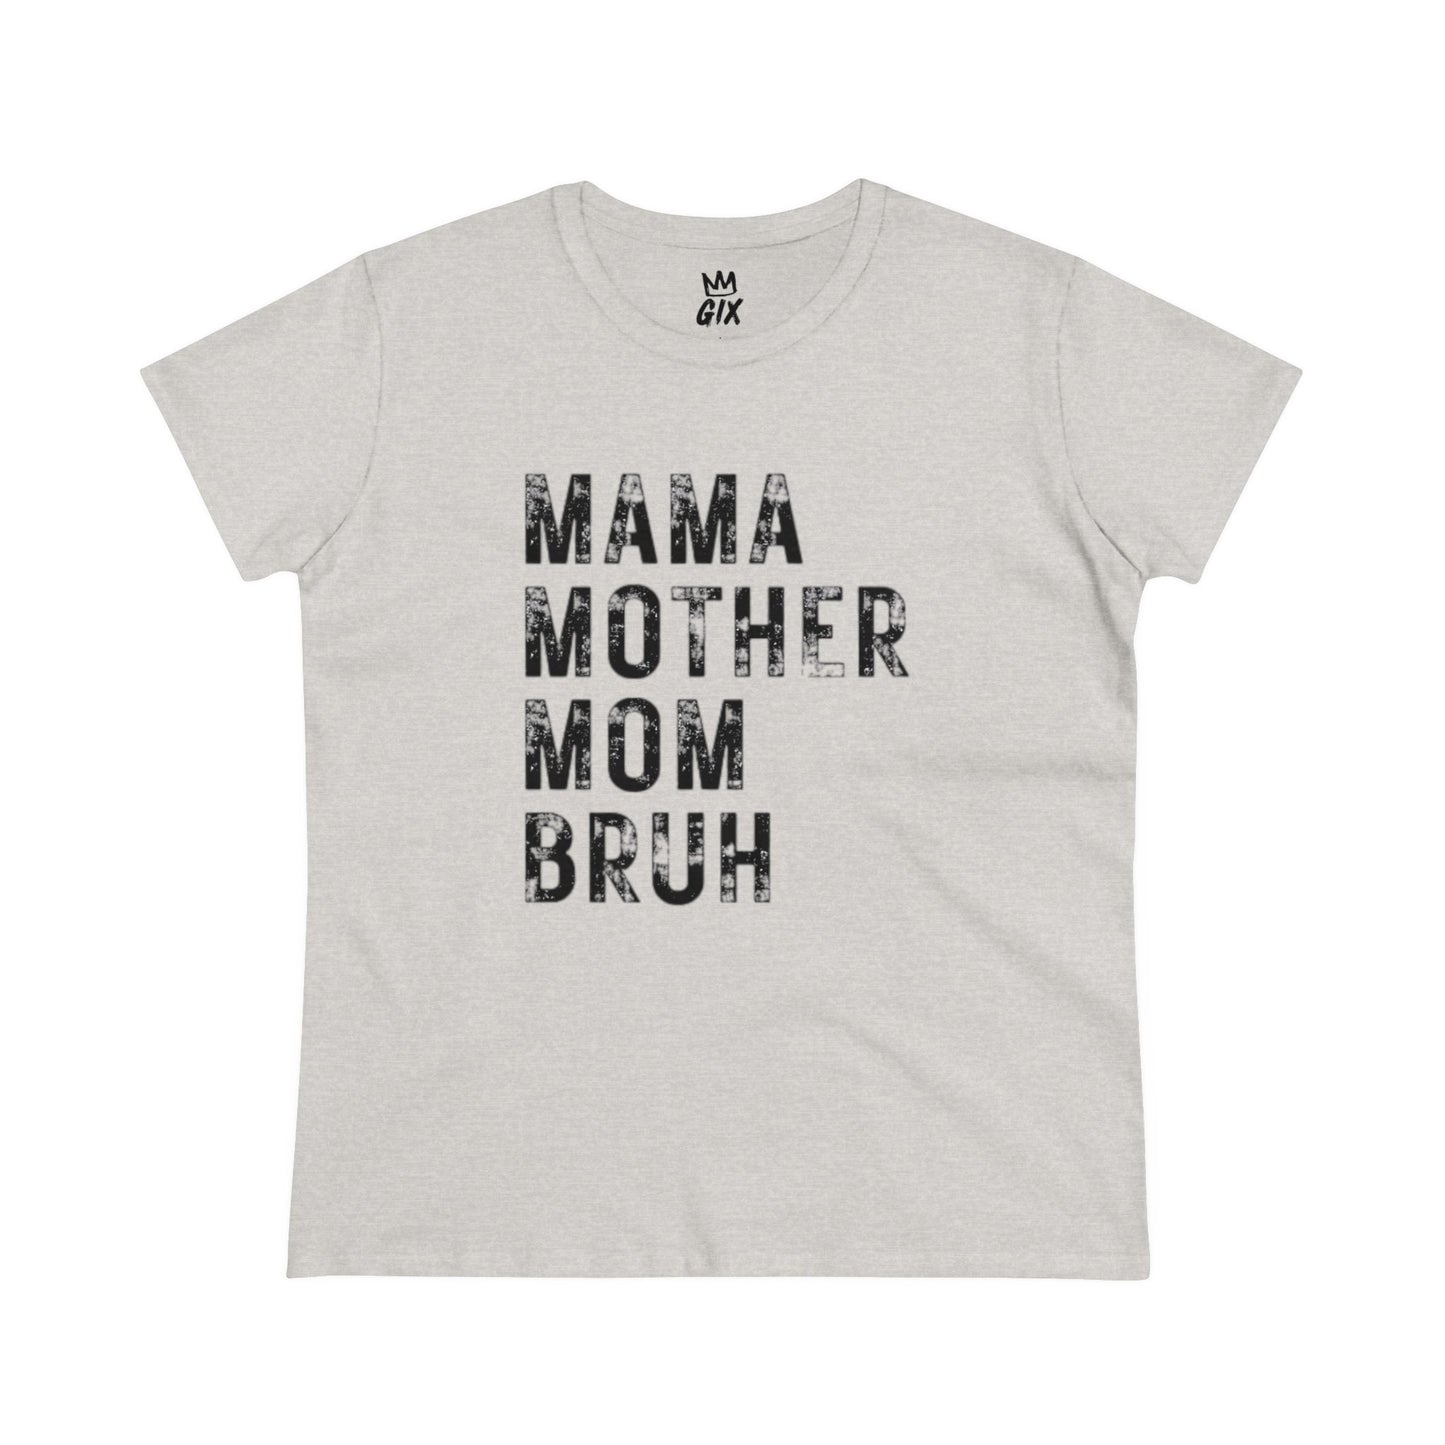 Mom, Mama, Mother, Bruh T-Shirt - Comfy Cotton Tee for Everyday Mom Life